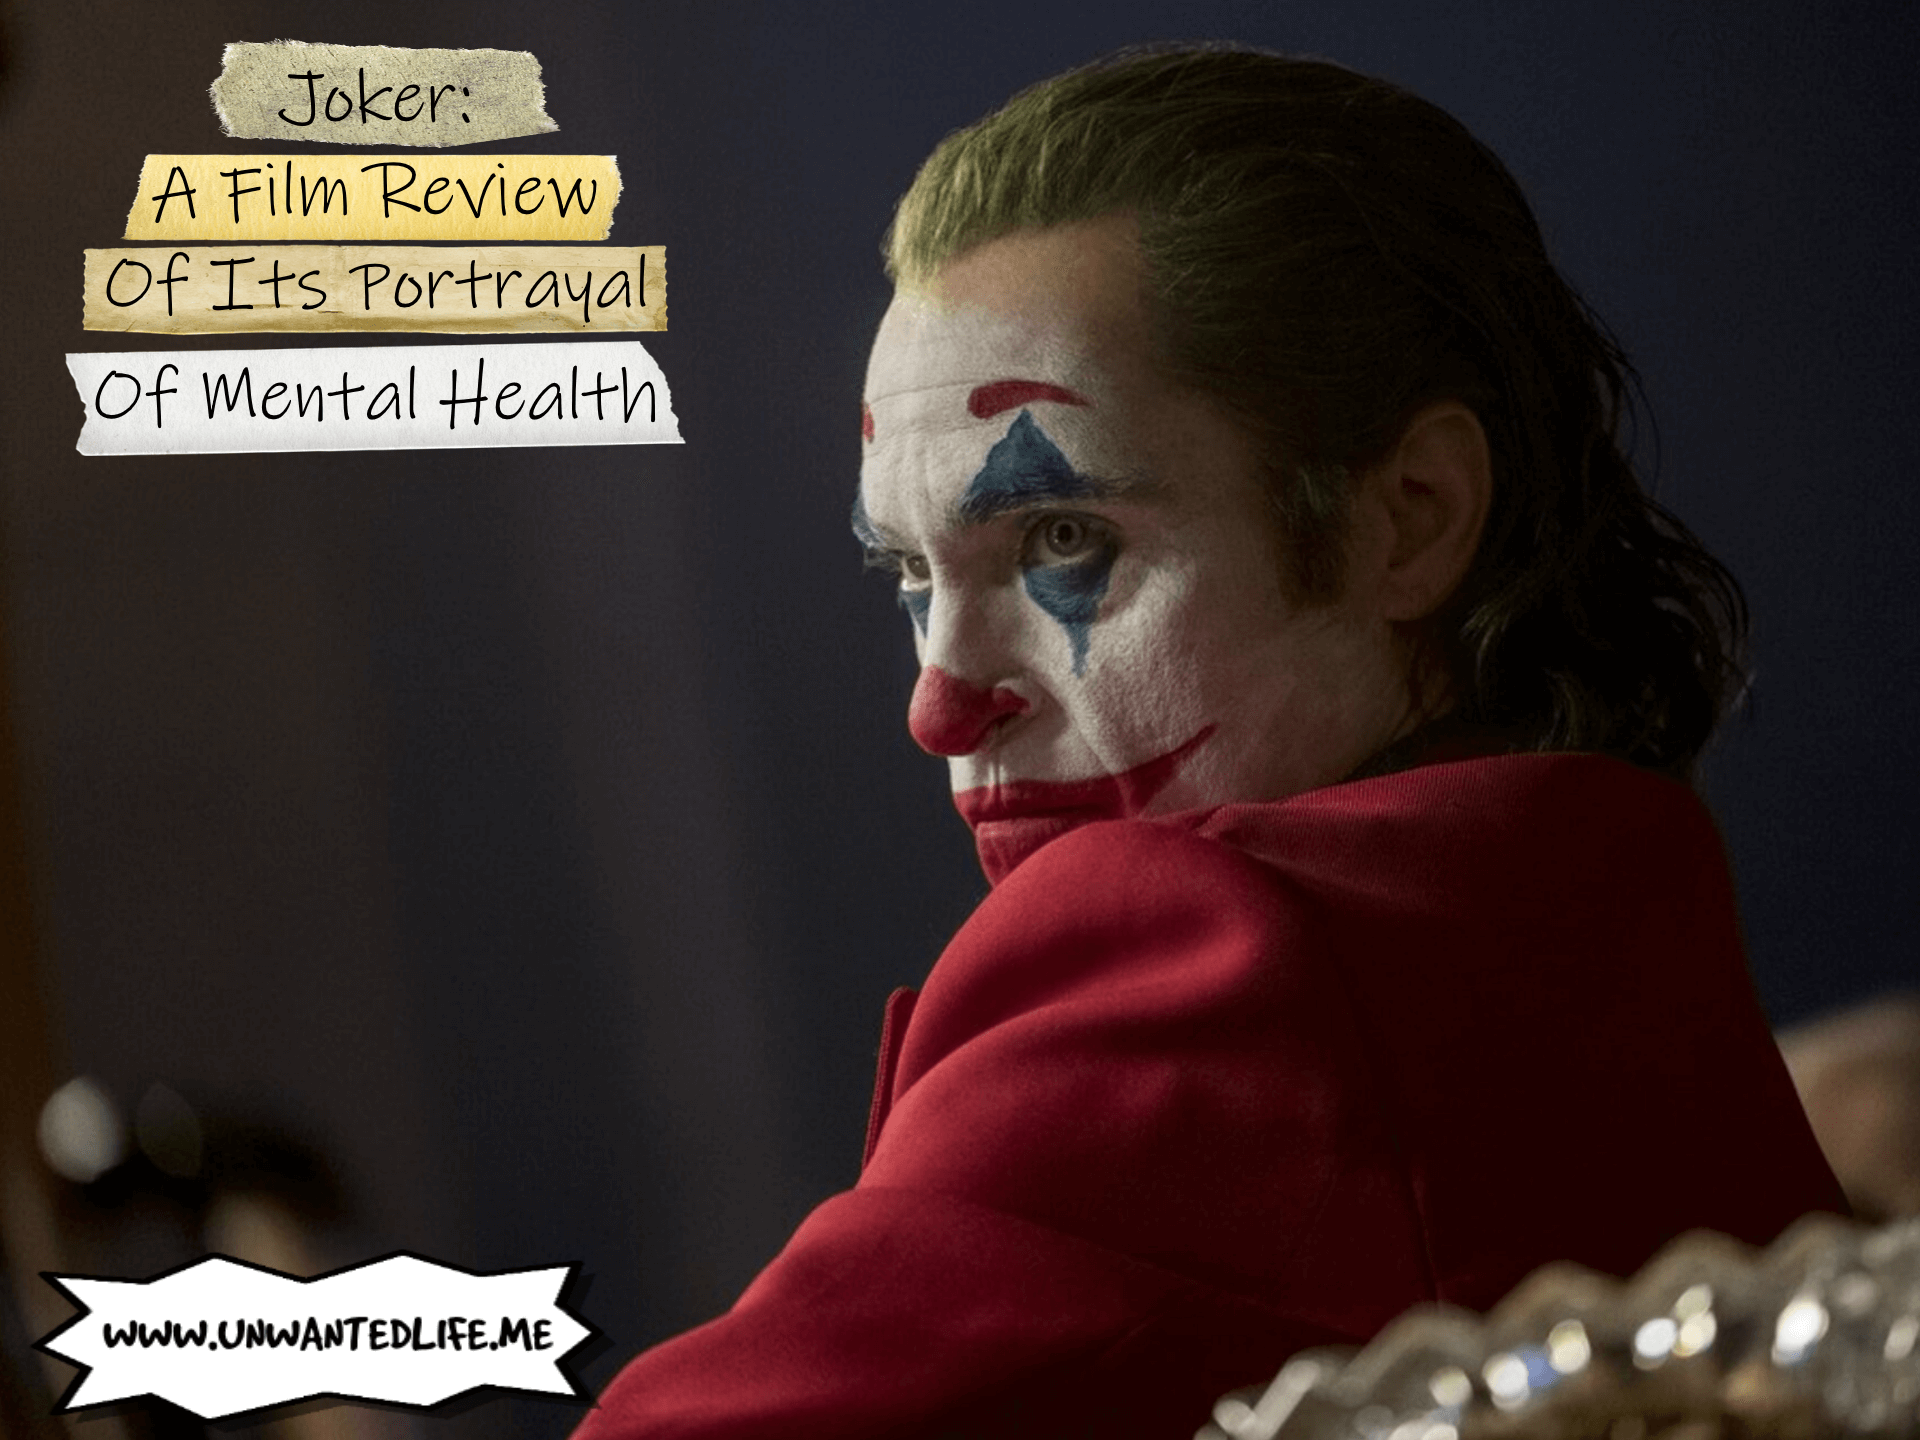 A promotional photo from the film Joker with the title of the article - Joker: A Film Review Of Its Portrayal Of Mental Health - across the top of the image